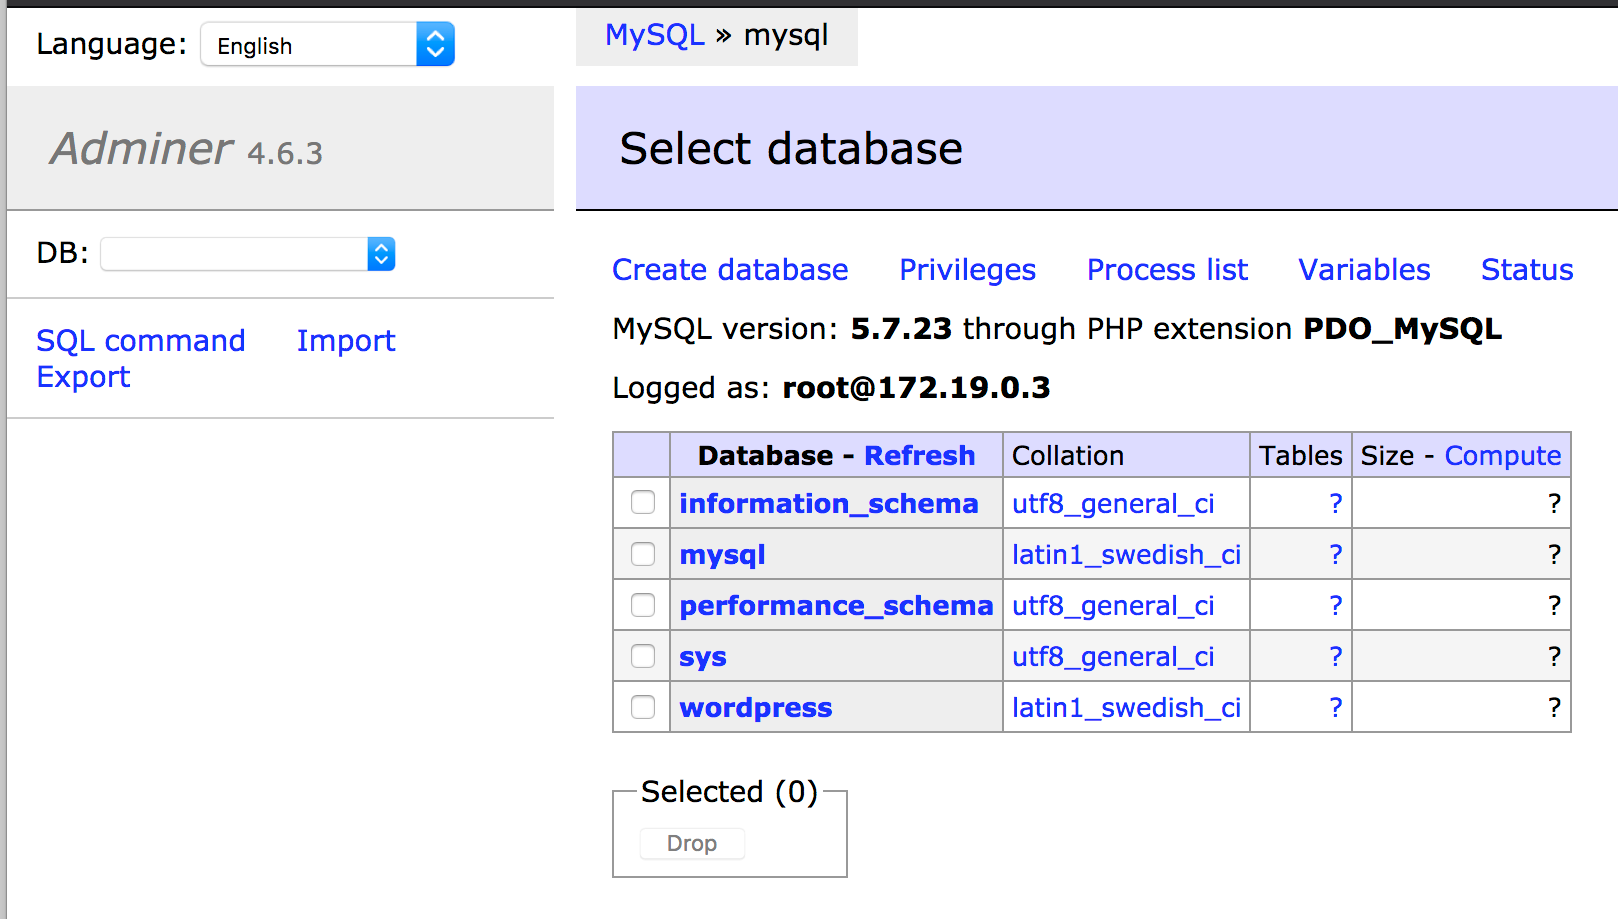 Adminer connected to the MySQL database